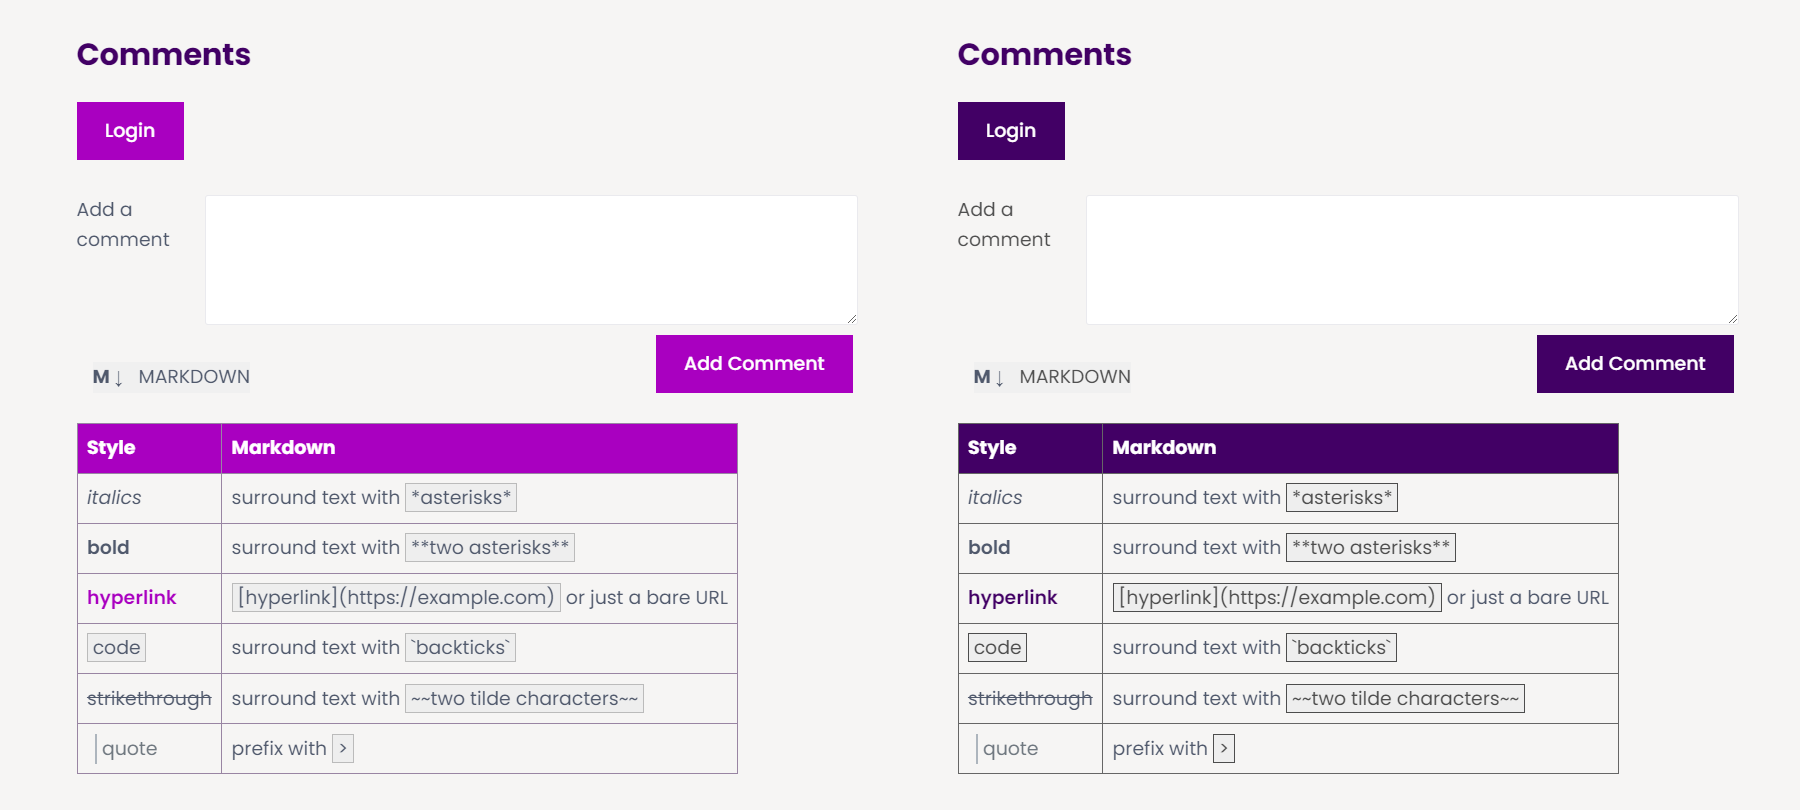 Side-by-side comparison of the blog comment form in regular and high contrast mode. In regular mode, the buttons use white text on a light purple background. The table providing basic markdown explanations uses the same whit text on light purple for the column headers, and its code samples use medium gray text on a light gray background with a slightly darker gray border. In high contrast mode, the buttons use the dark purple background. The table uses dark purple as a background for the column headers, and the code samples use a lighter background, but make the text and border much darker